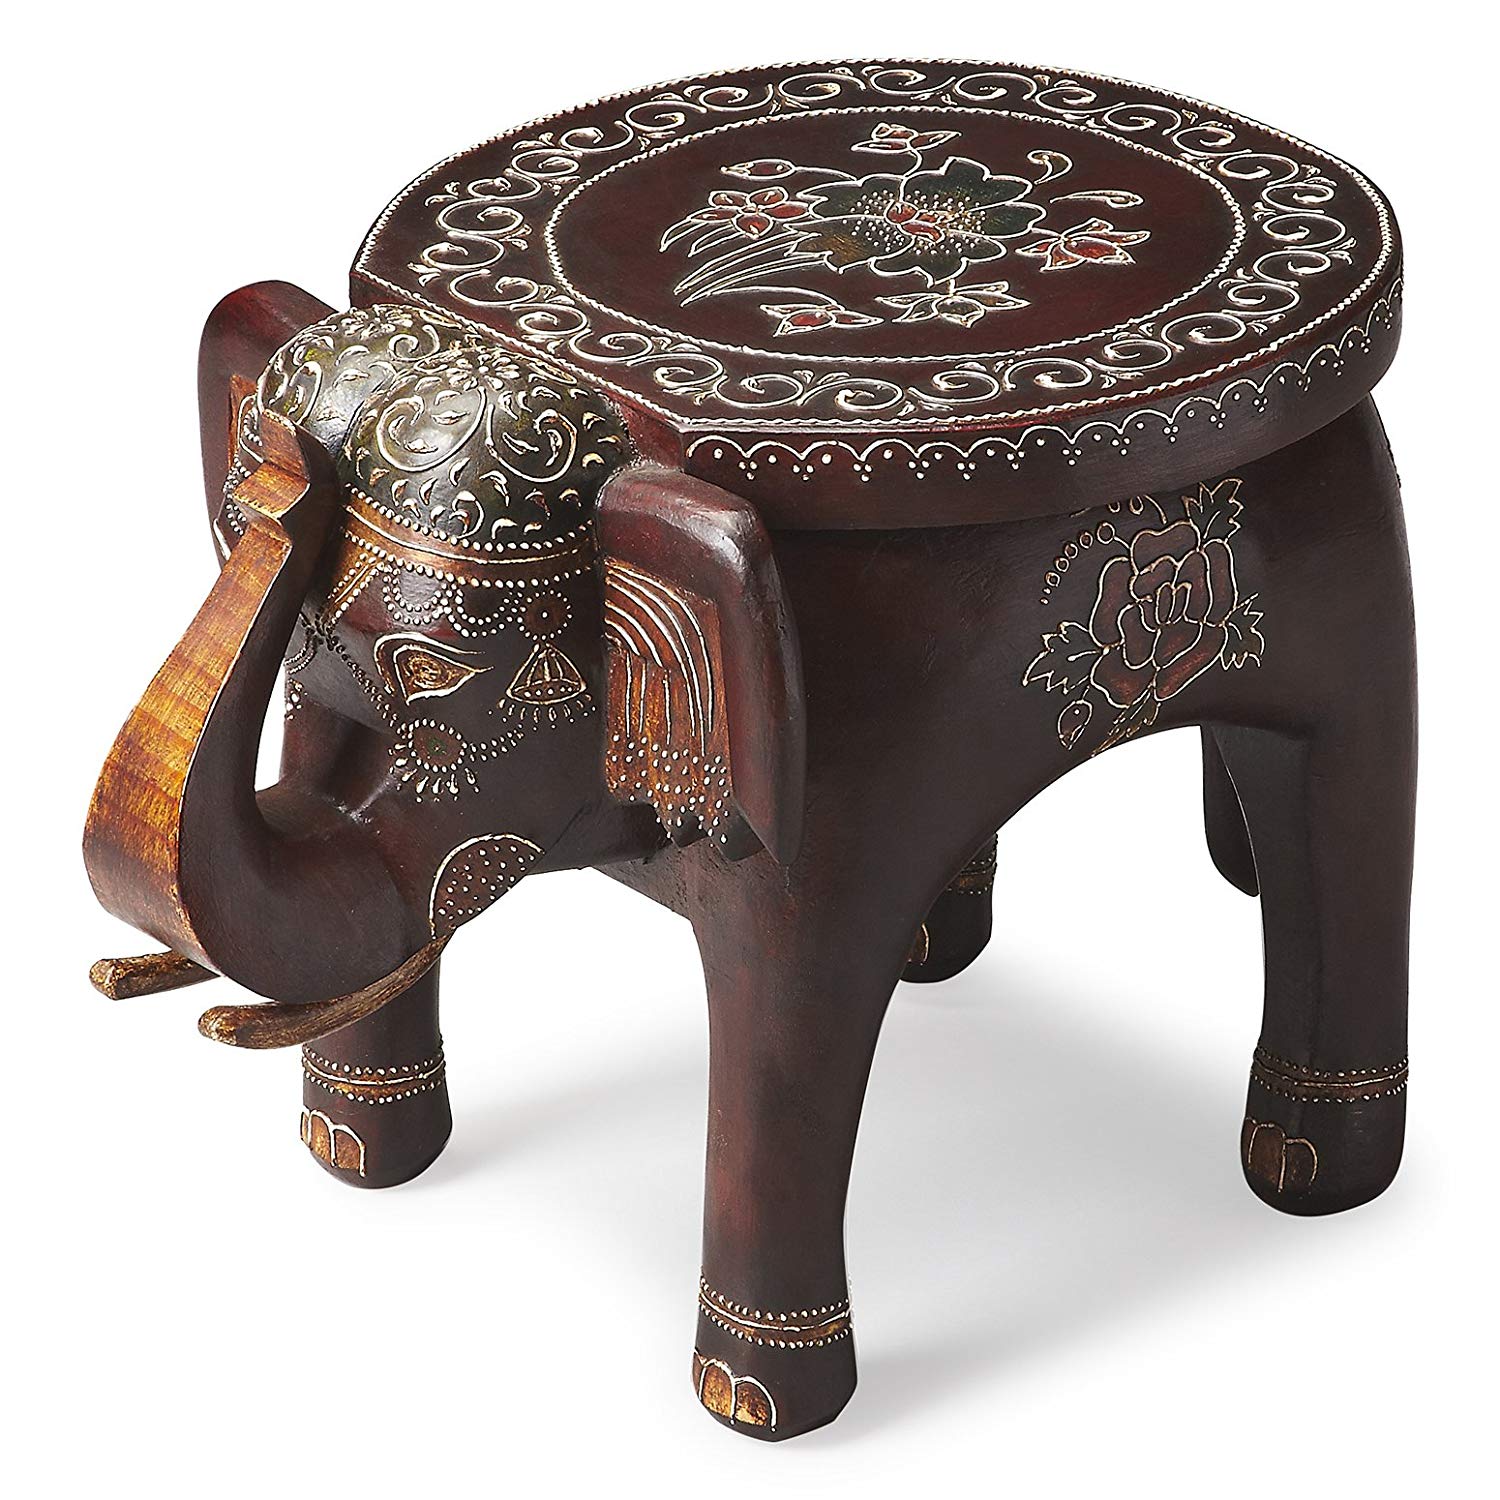 tables elephant accent table plant stand furniture kitchen dining victorian end wedding centerpiece ideas distressed nightstand long wooden patio chairs garage bedroom bench